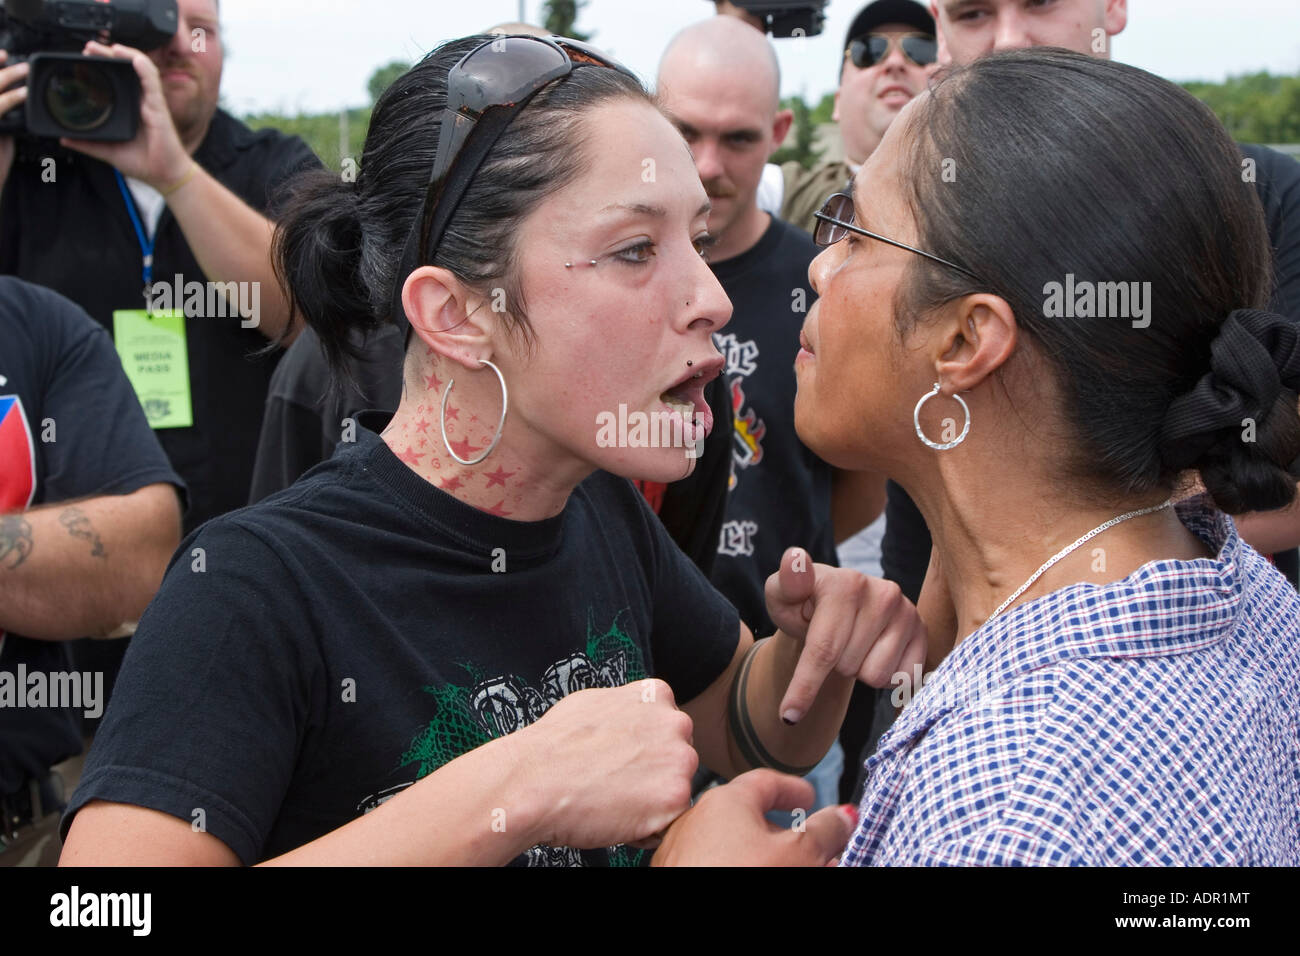 Argument Between Nazi Supporter and Opponent Stock Photo